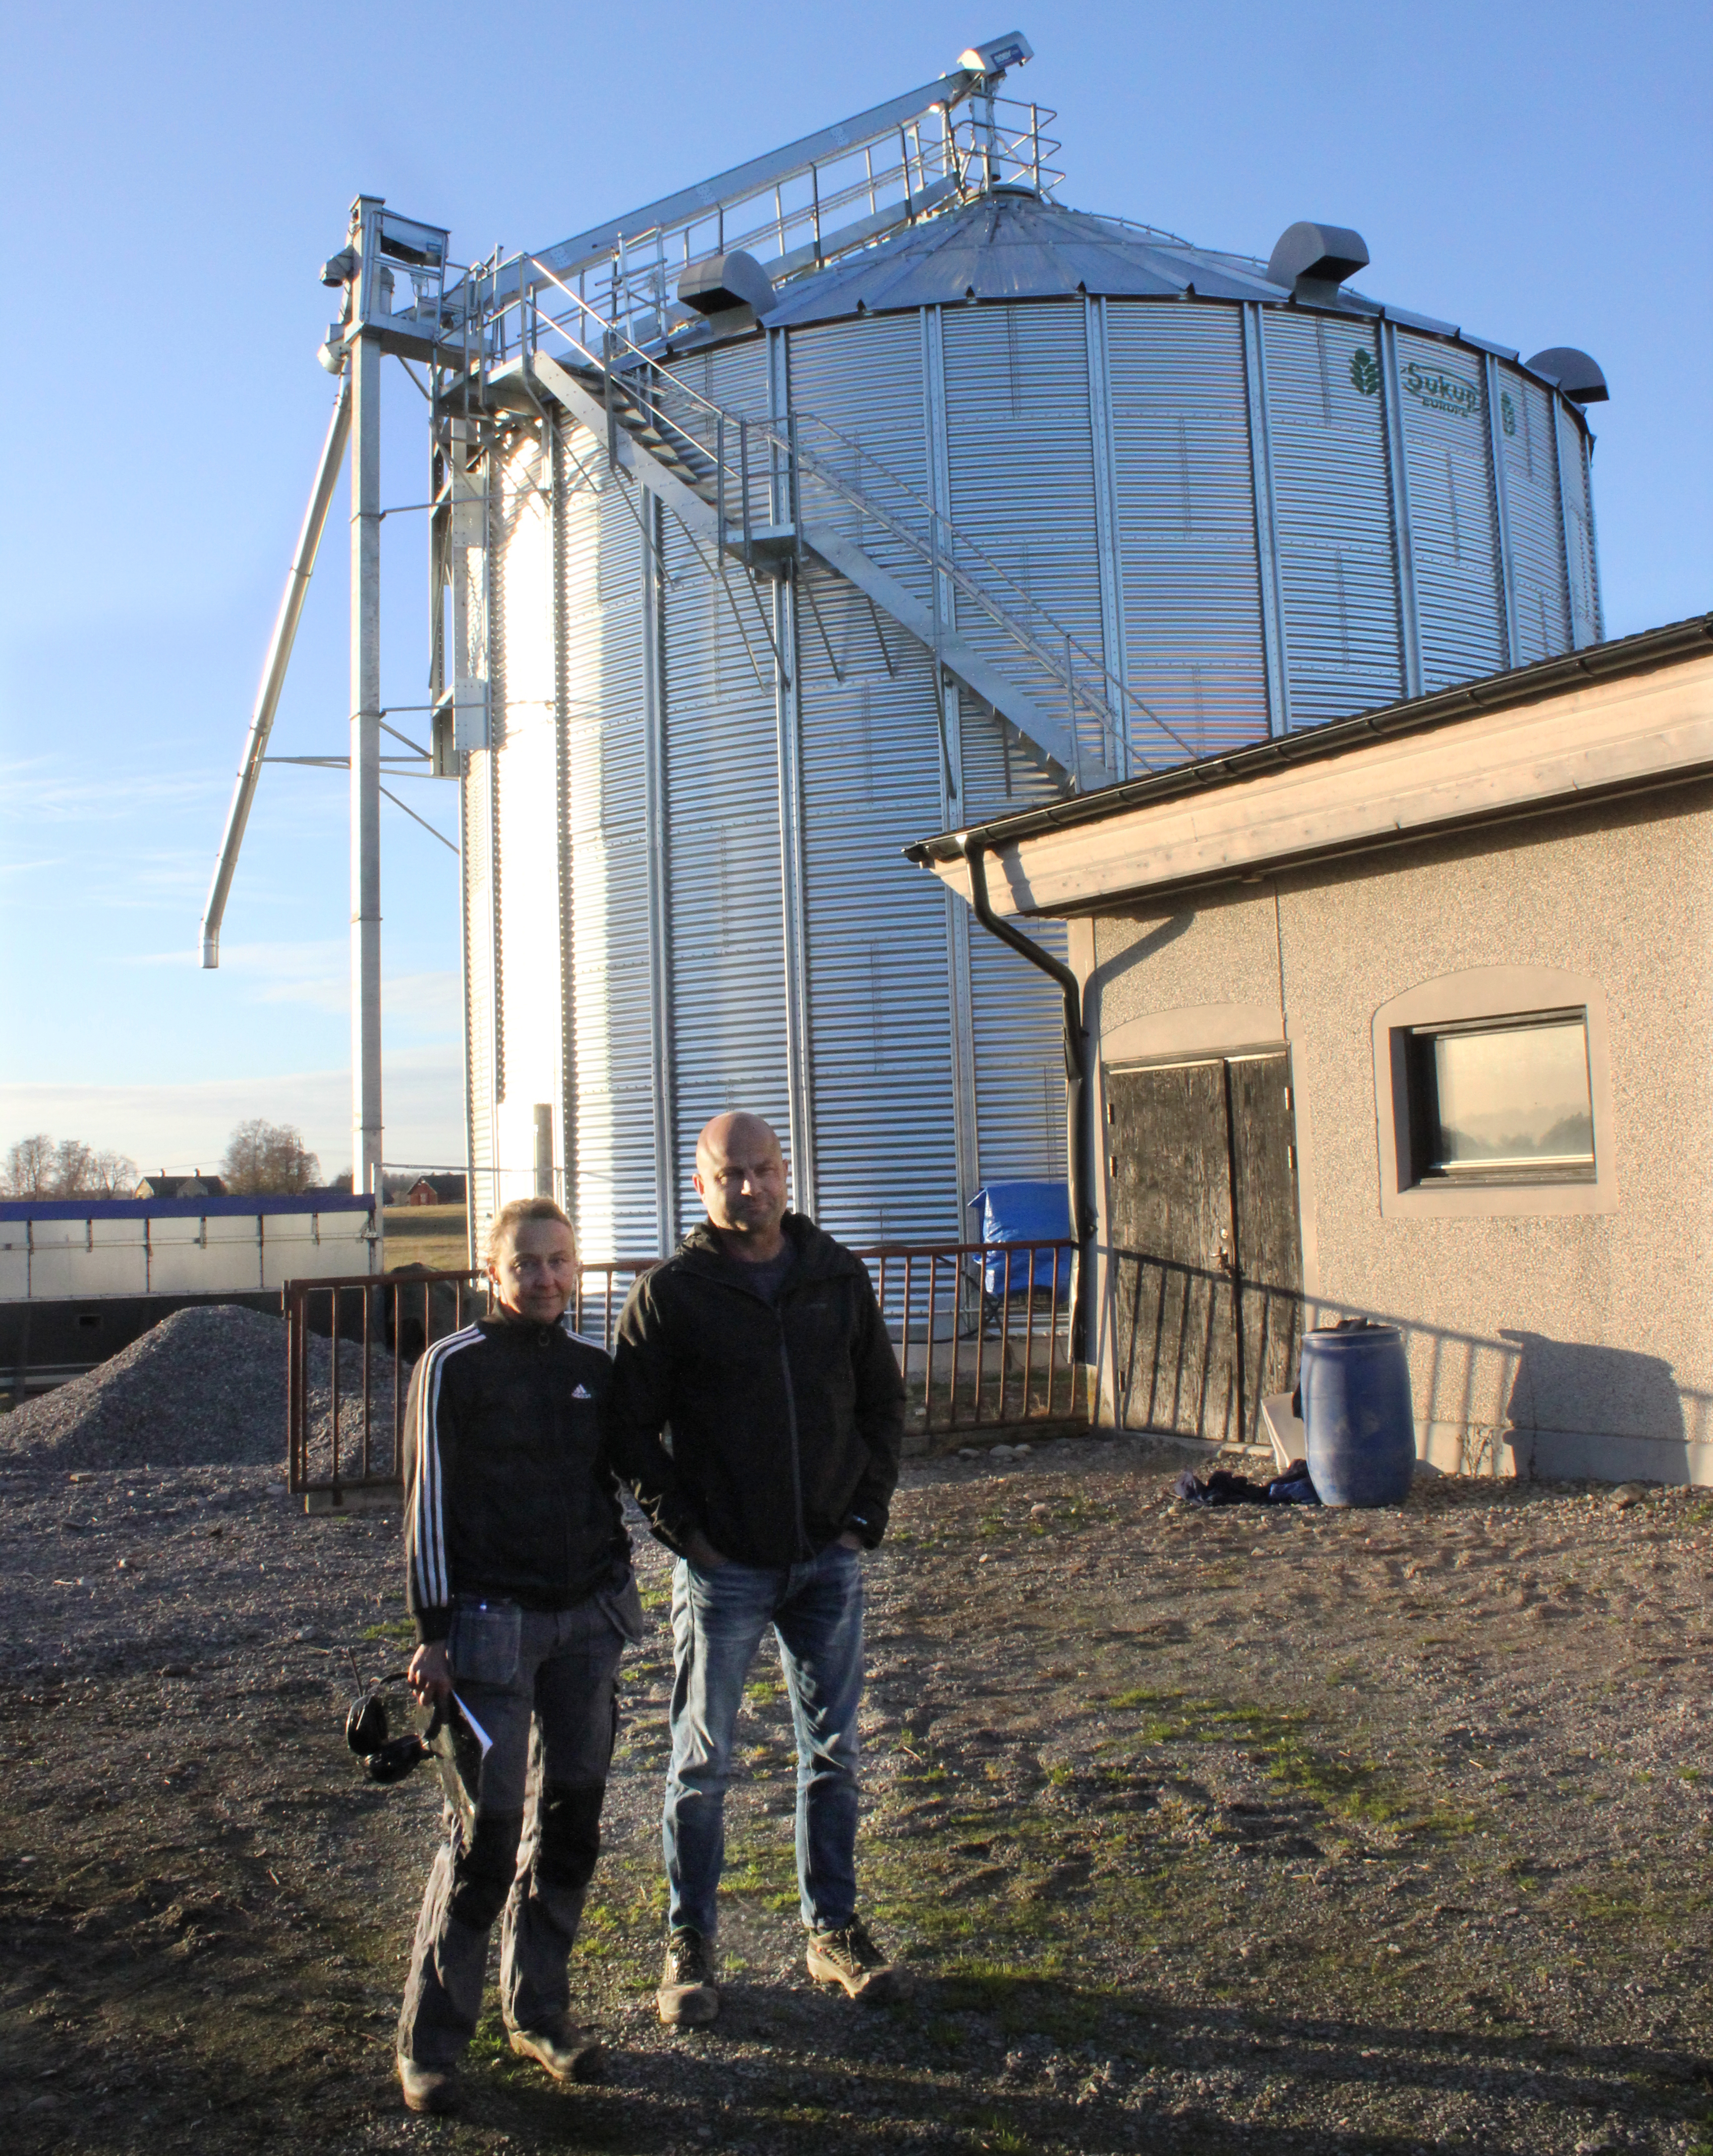 Jeanette and Fredrik Elander are raising pigs on two farms. In the silage of Viggby Farm, there are 700 tons of wheat. This year you have also grown cereals, oats and beans.